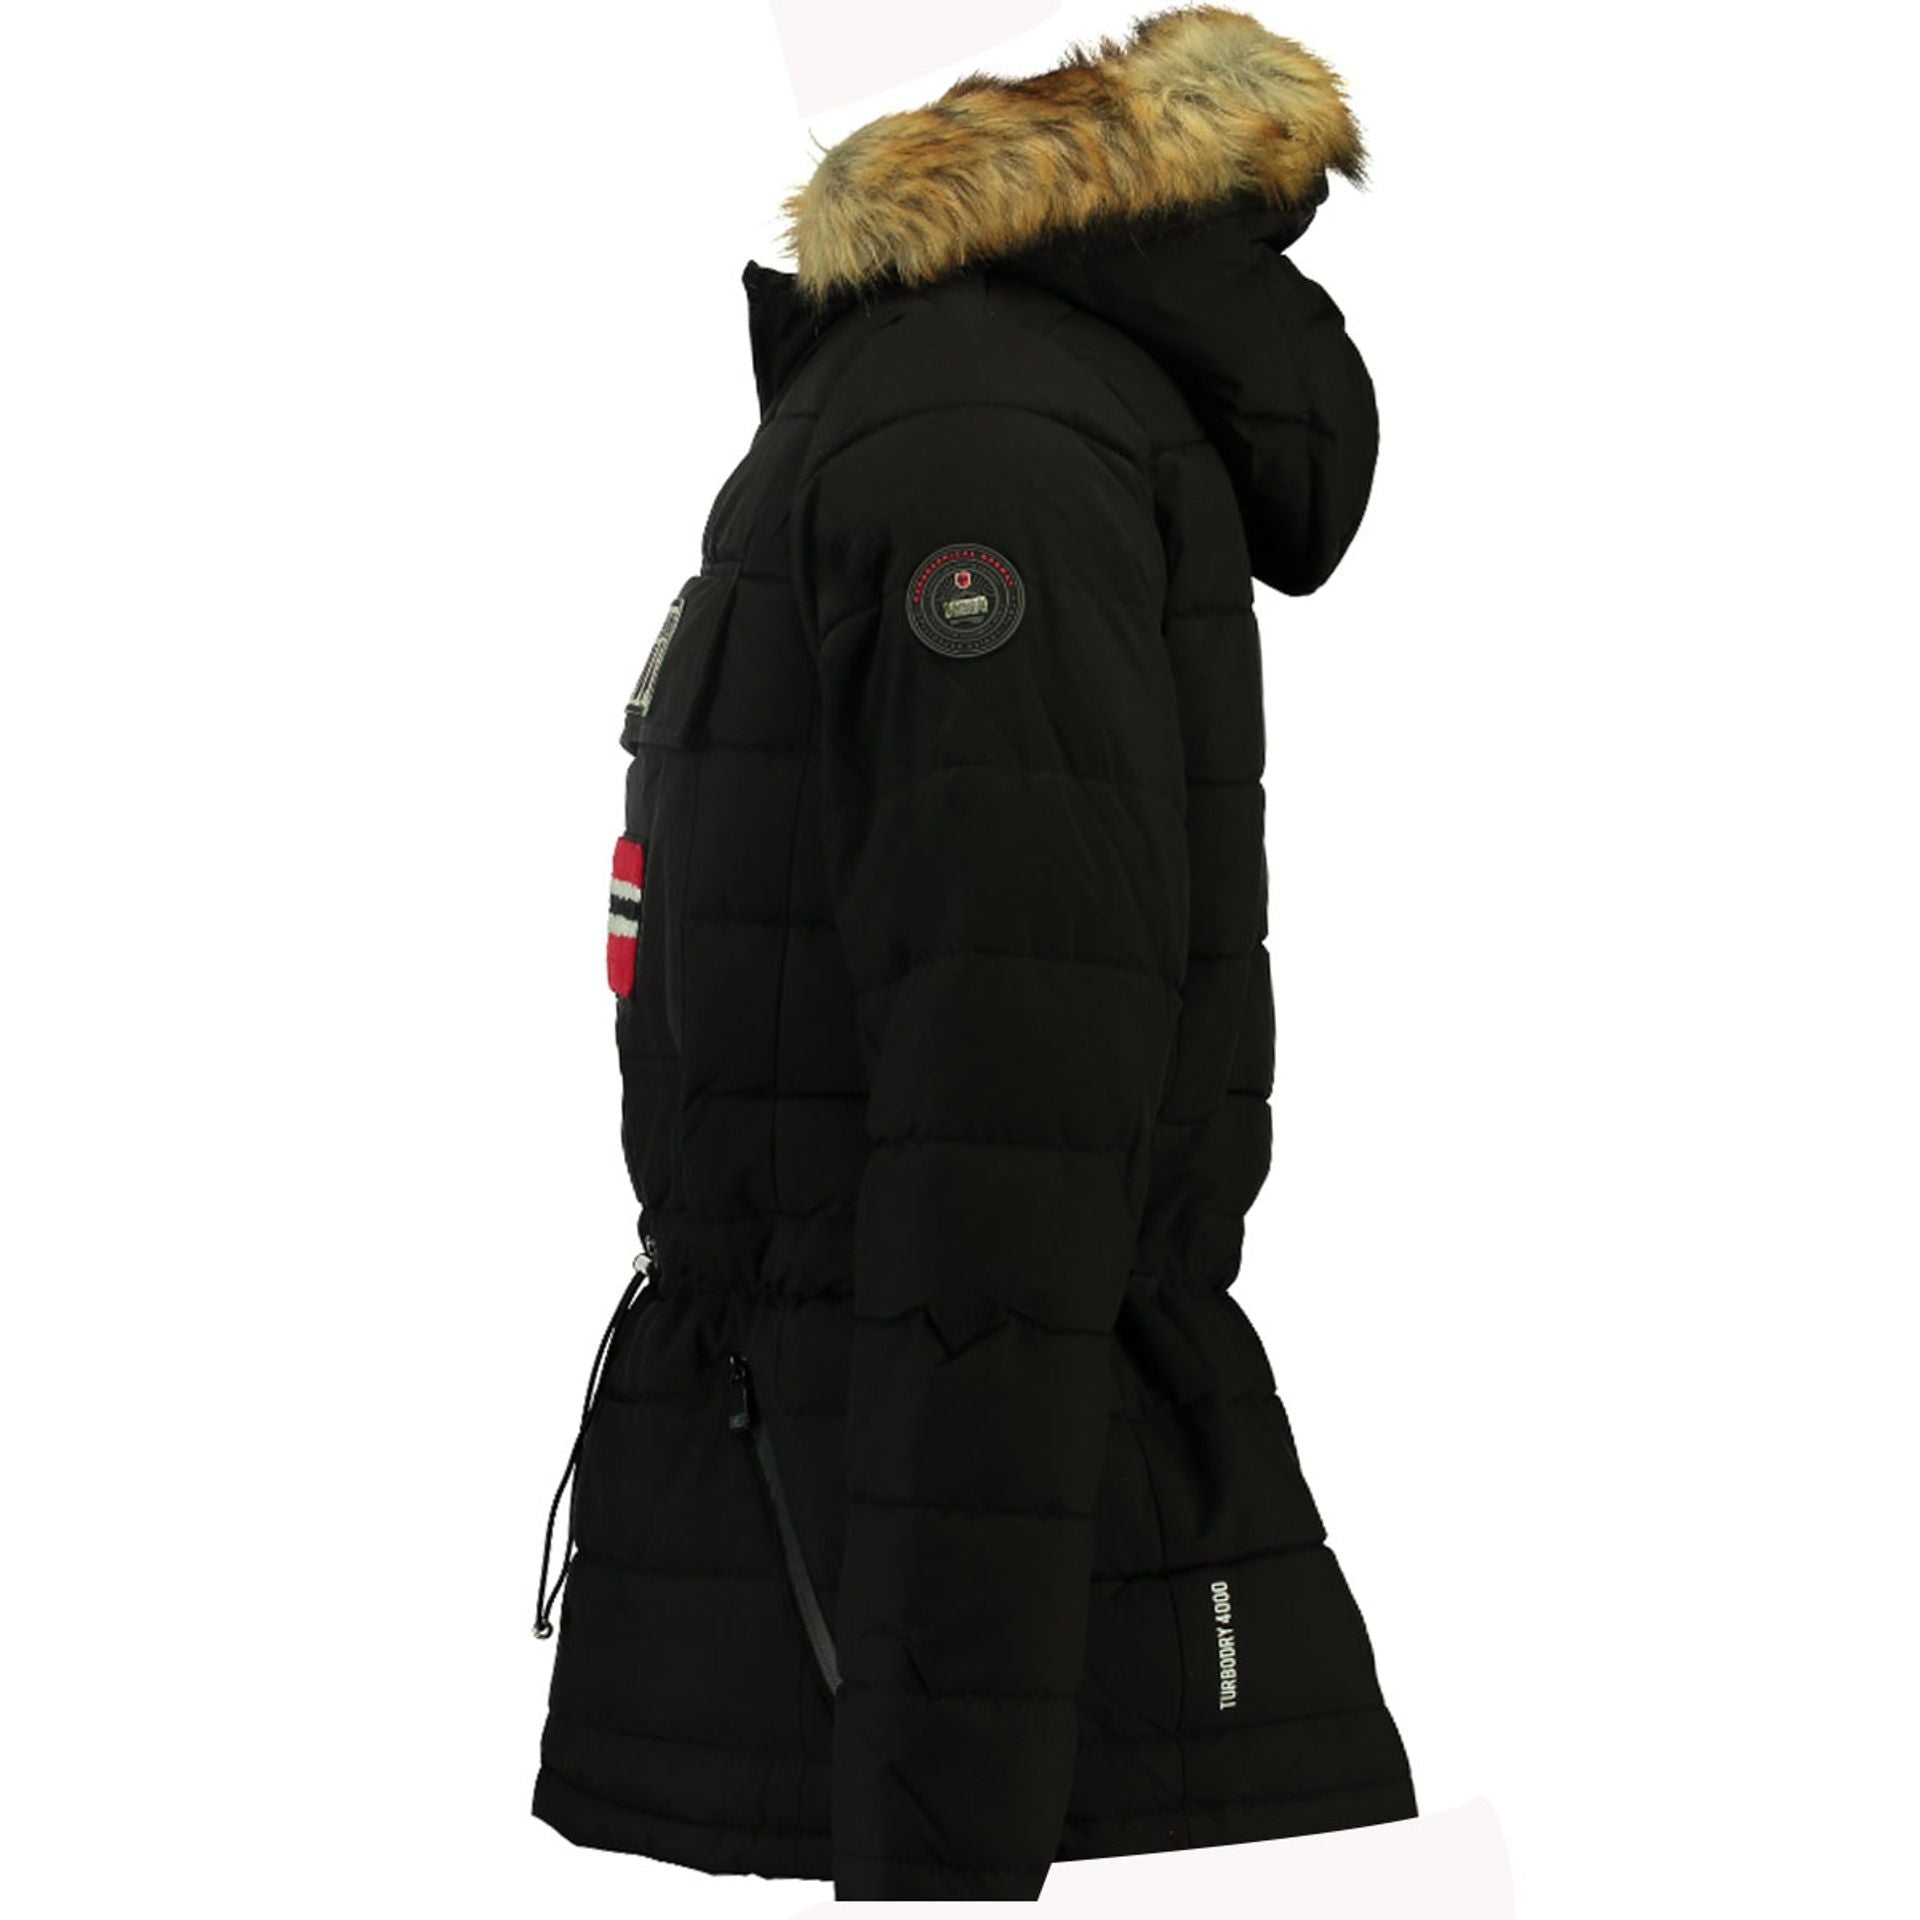 Geographical Norway Jackets